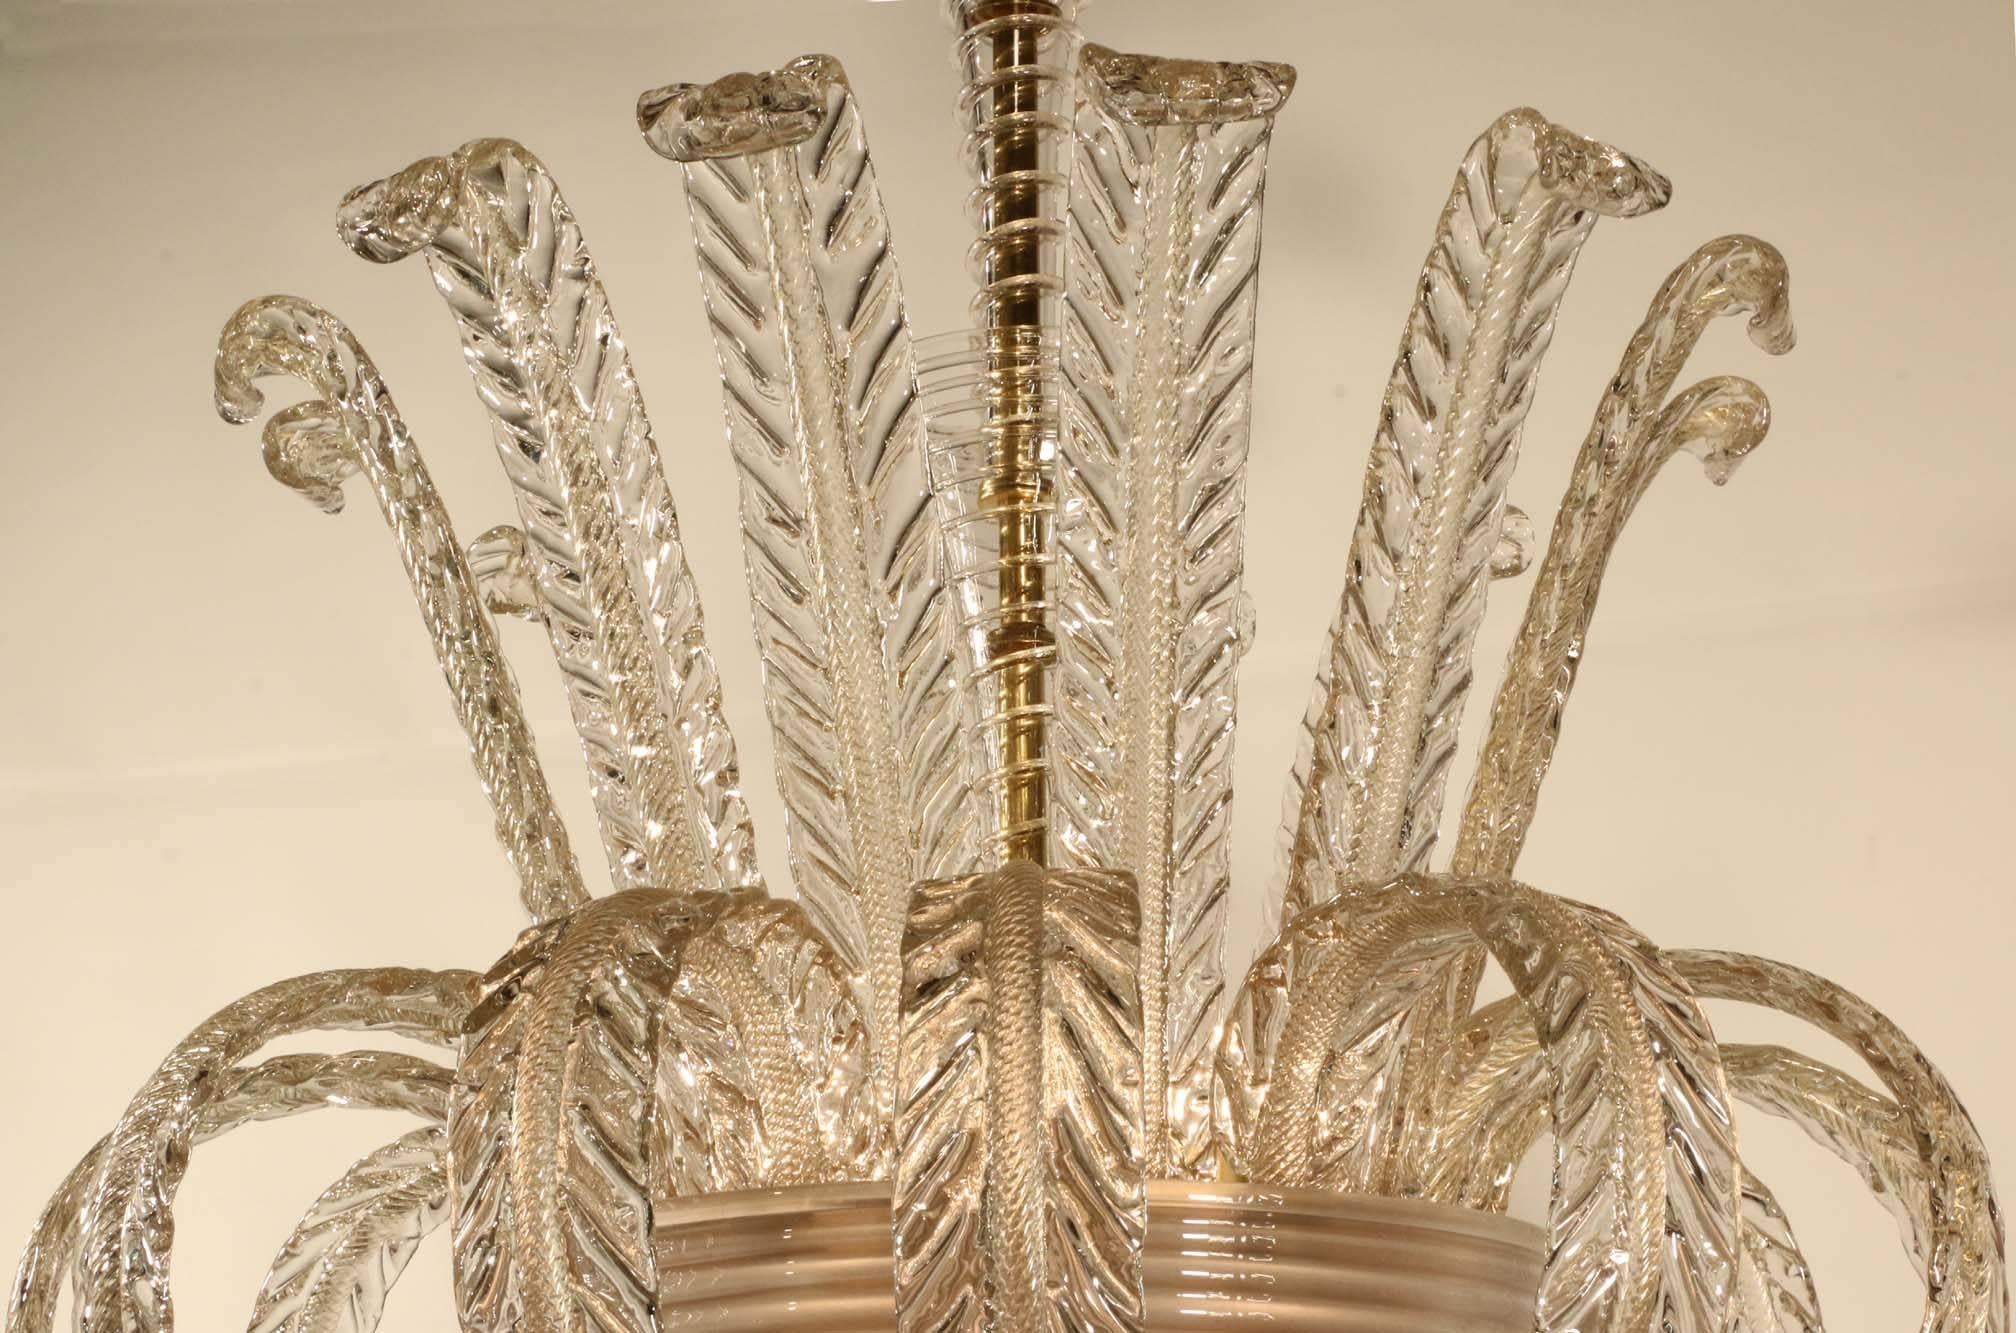 Mid-20th century Murano chandelier, in gold flecked and aventurine crystal:
The banded hemispherical bowl set with alternating raised and down-swept stylized acanthus, the central stem writhen fluted and trumpet shaped.